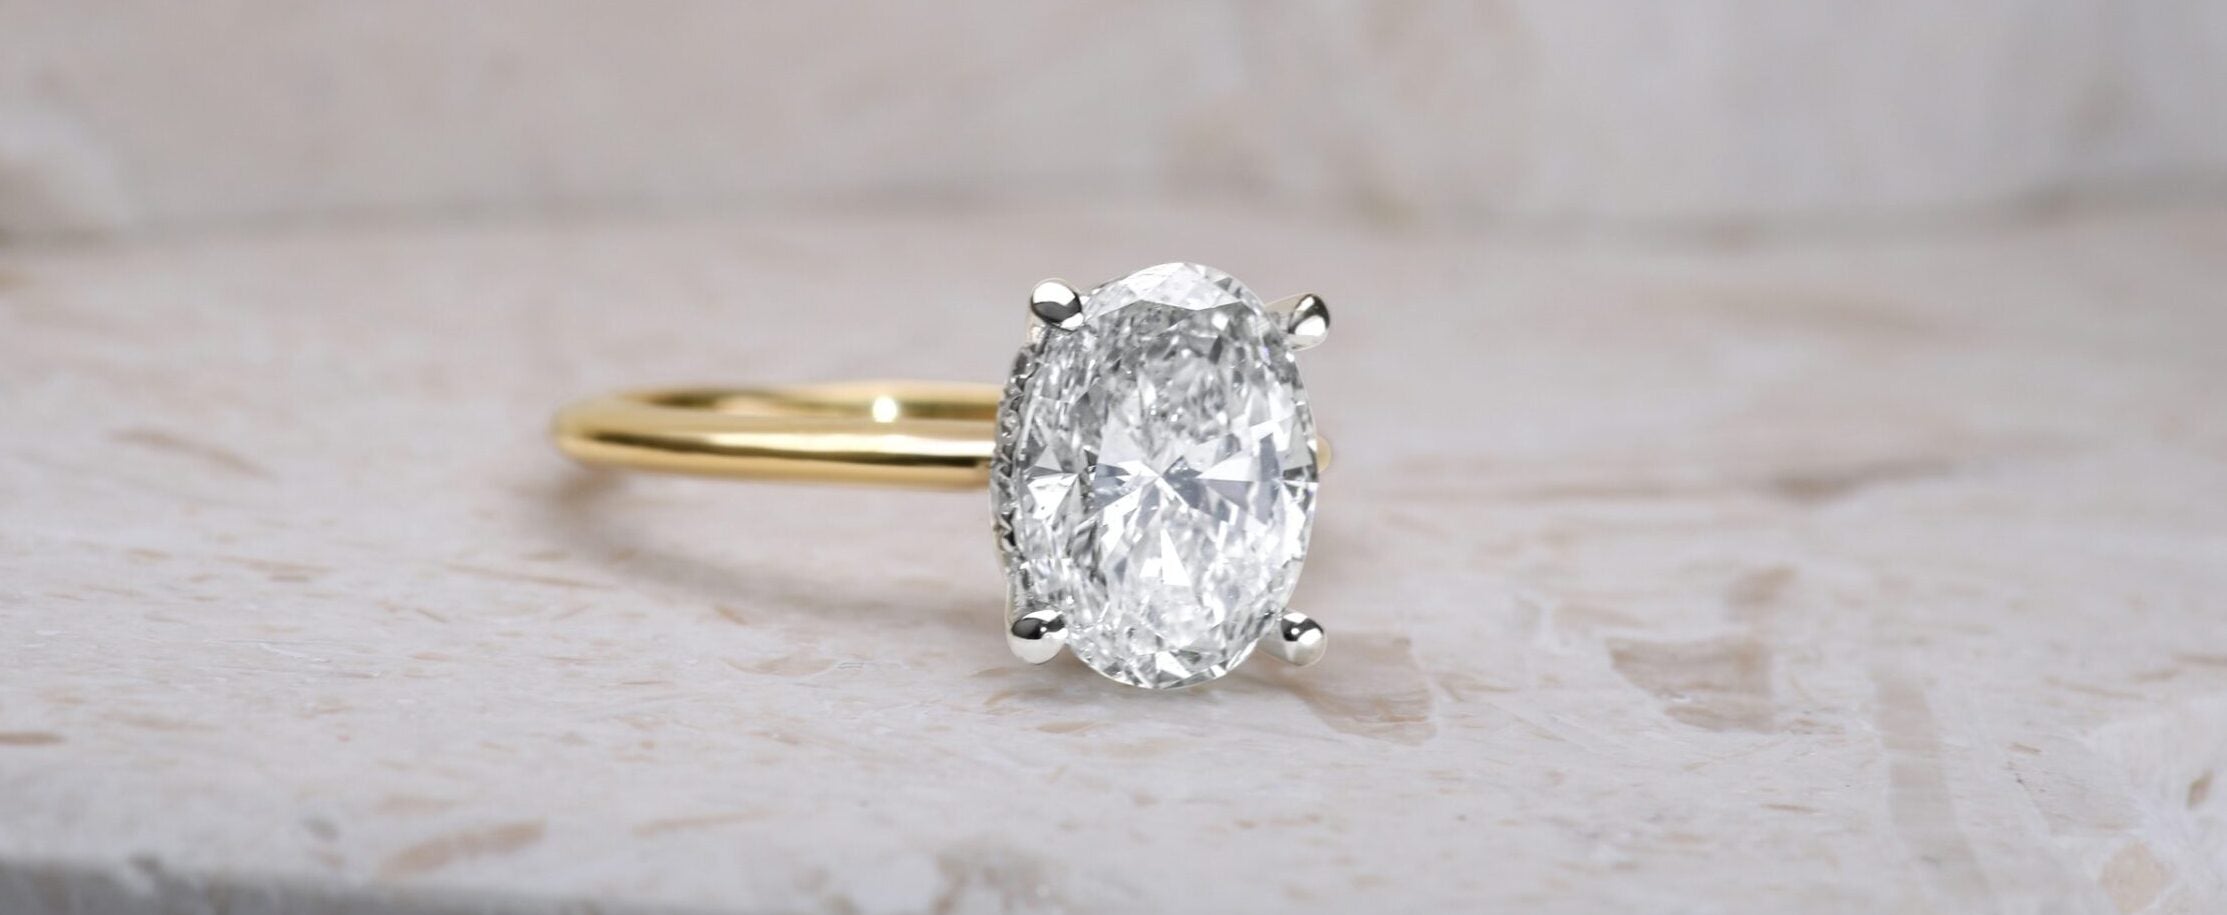 The Pros of the Solitaire Engagement Ring